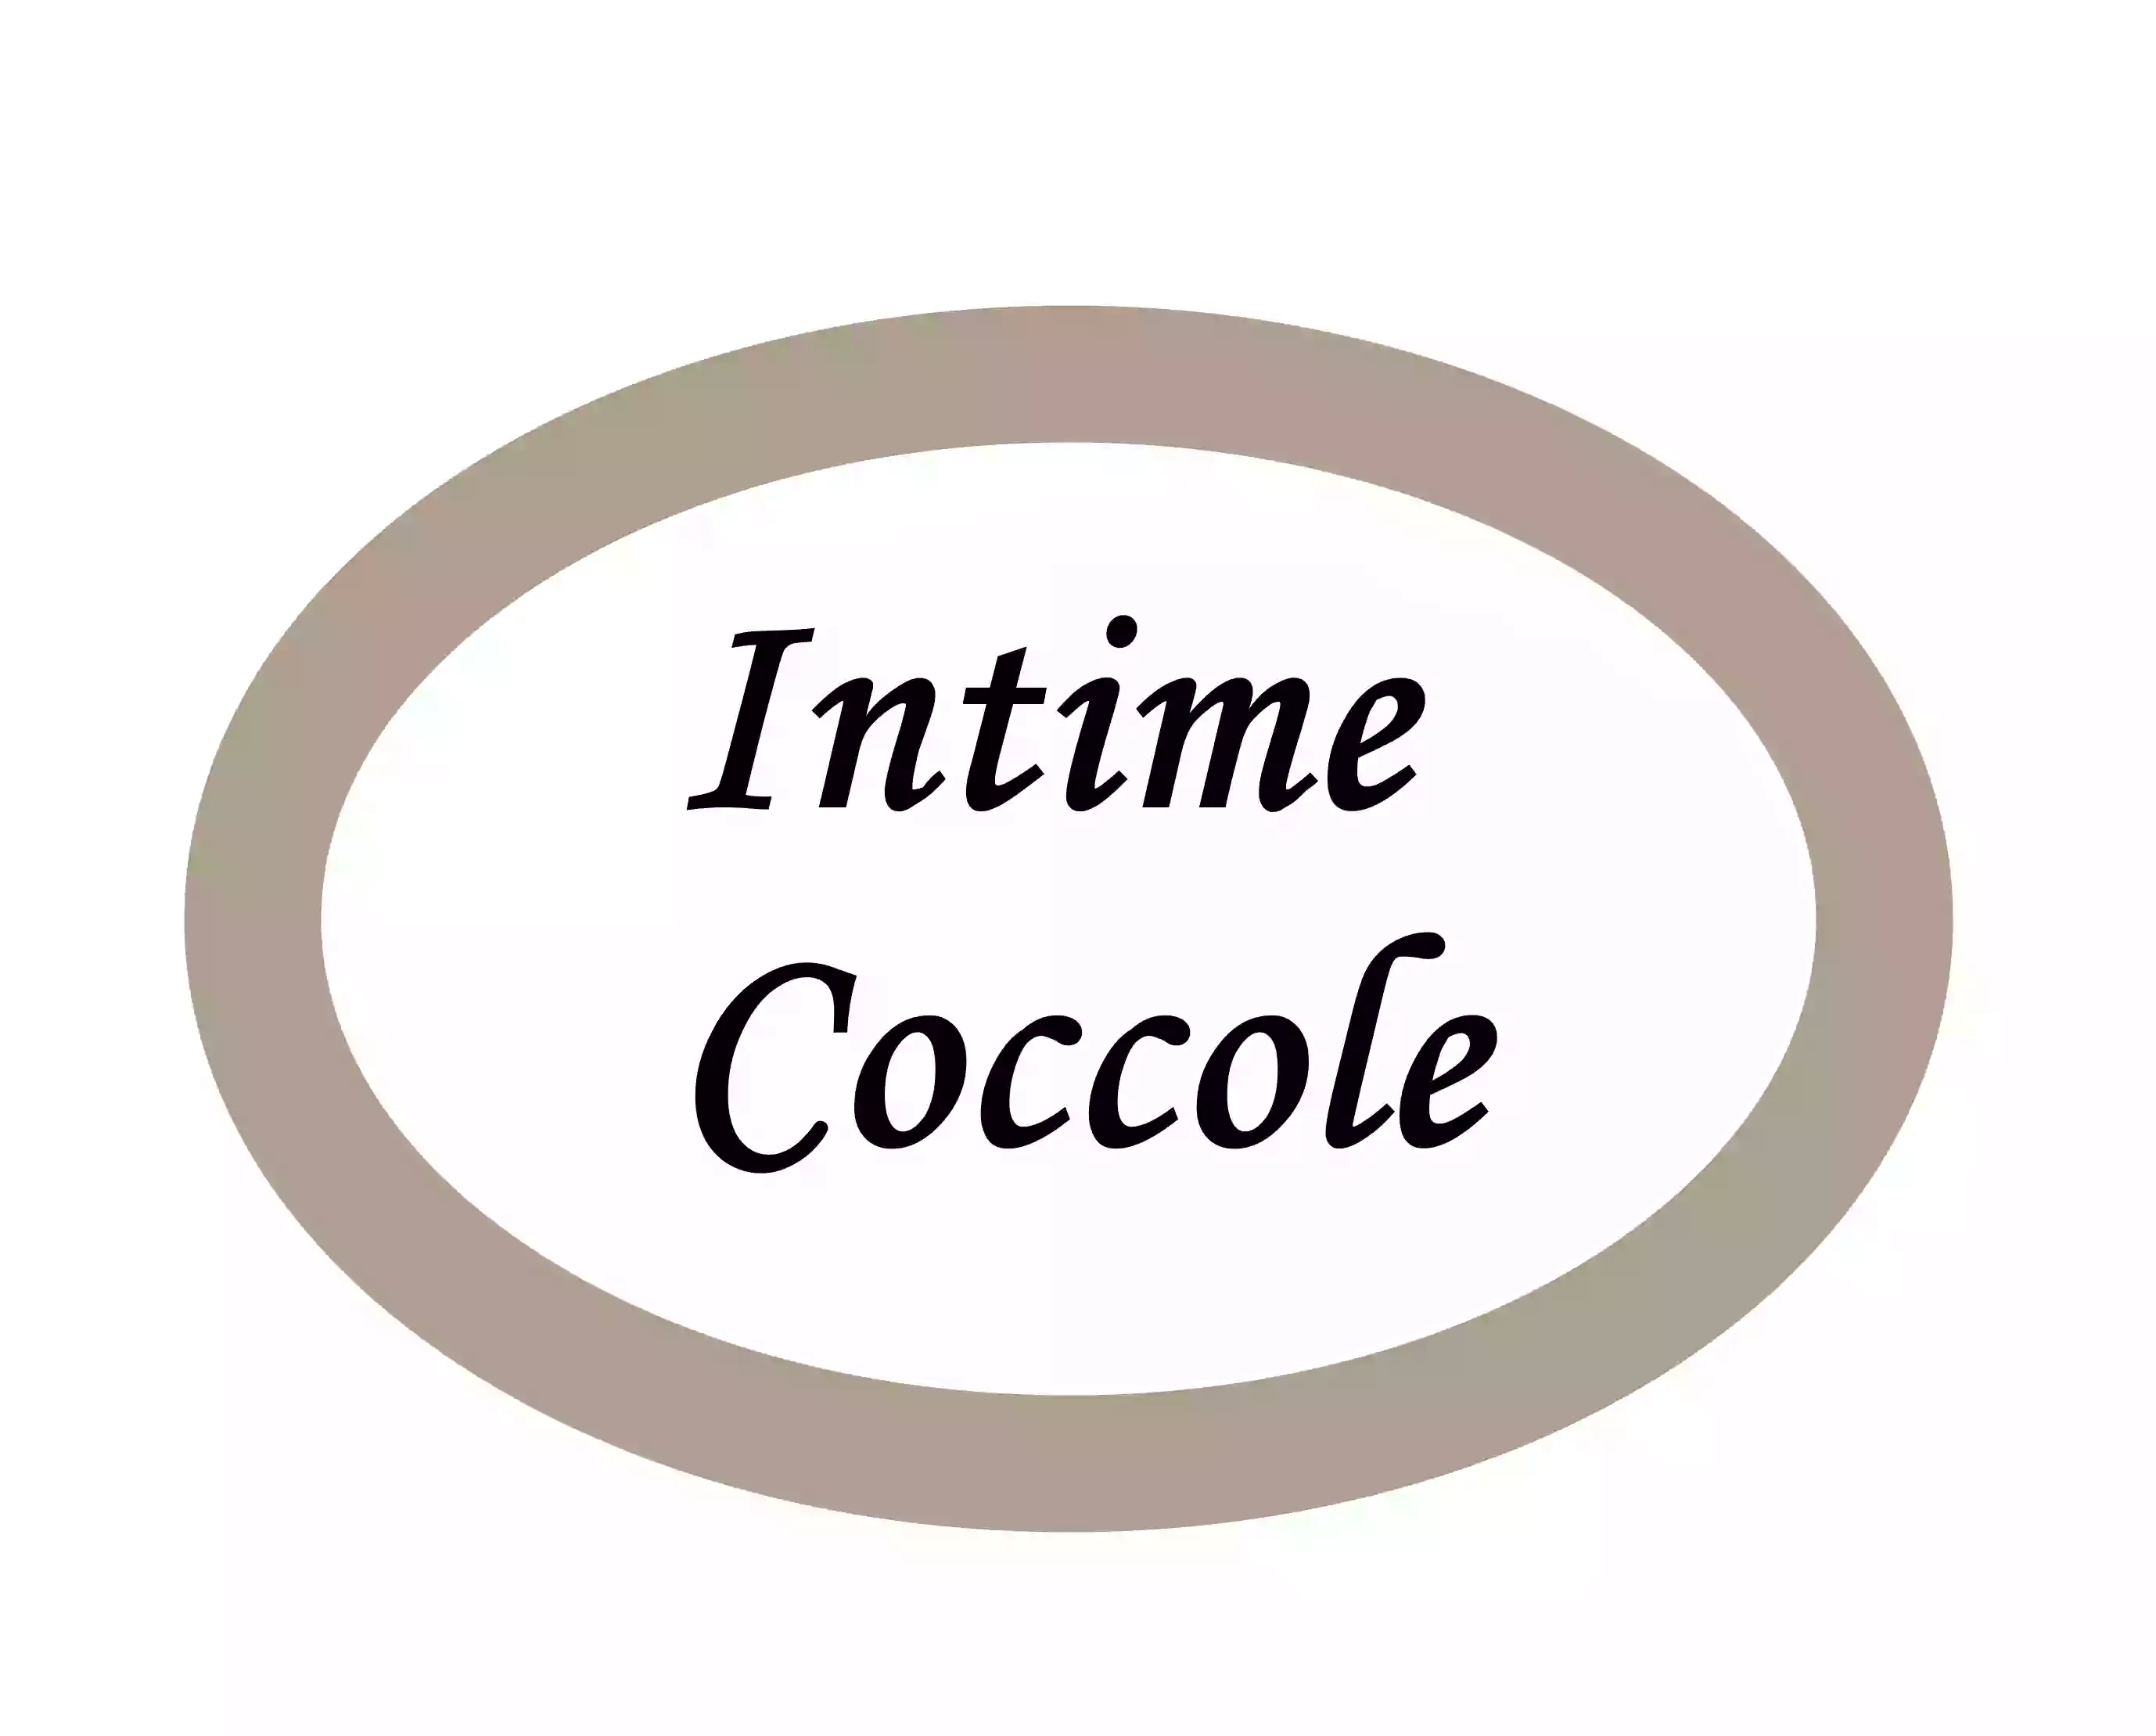 intime coccole